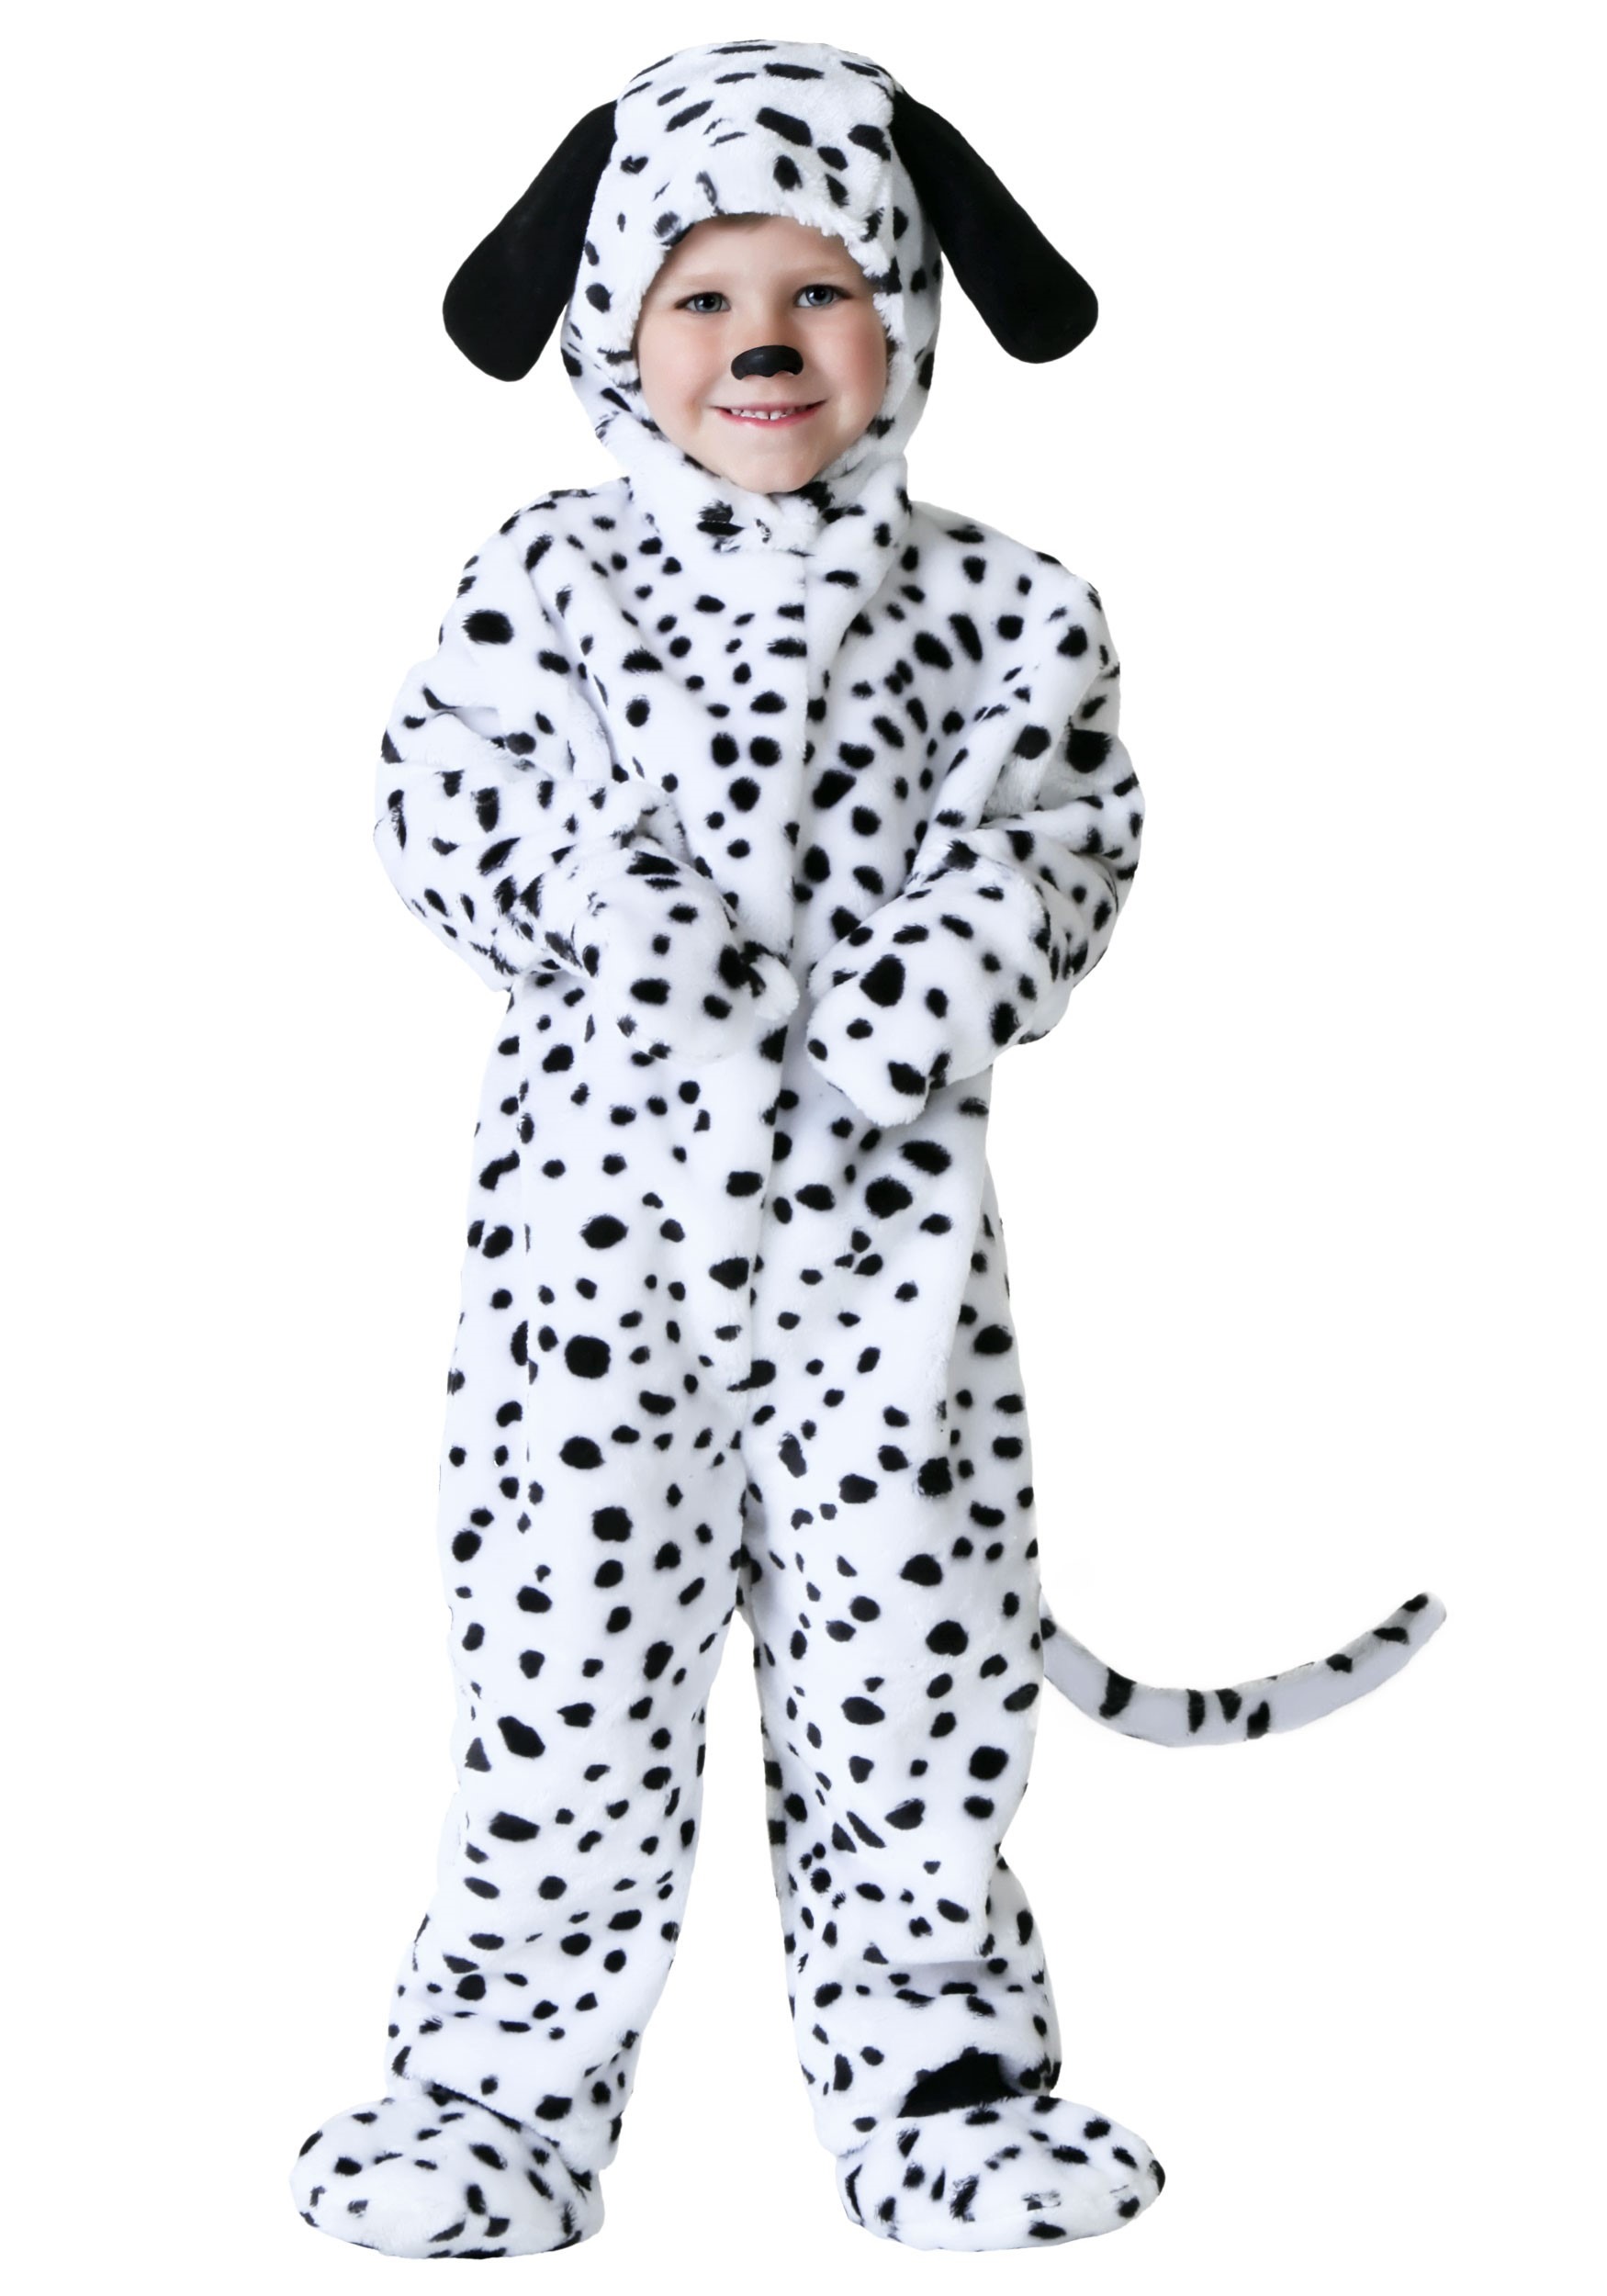 Photos - Fancy Dress Toddler FUN Costumes Dalmatian Dog Costume for Toddlers | Exclusive | Made By Us B 